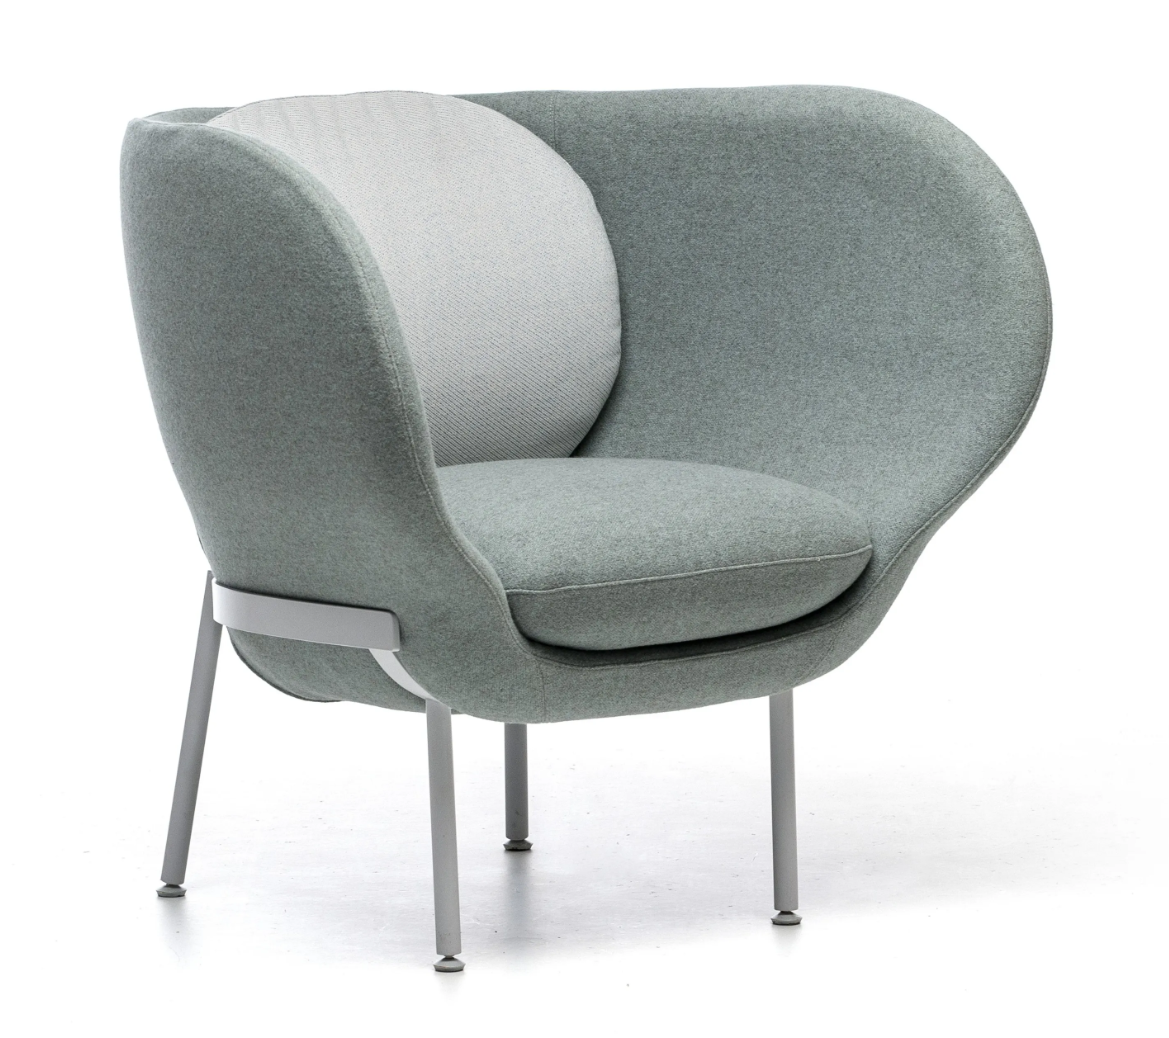 Product Image Armada Armchair Low